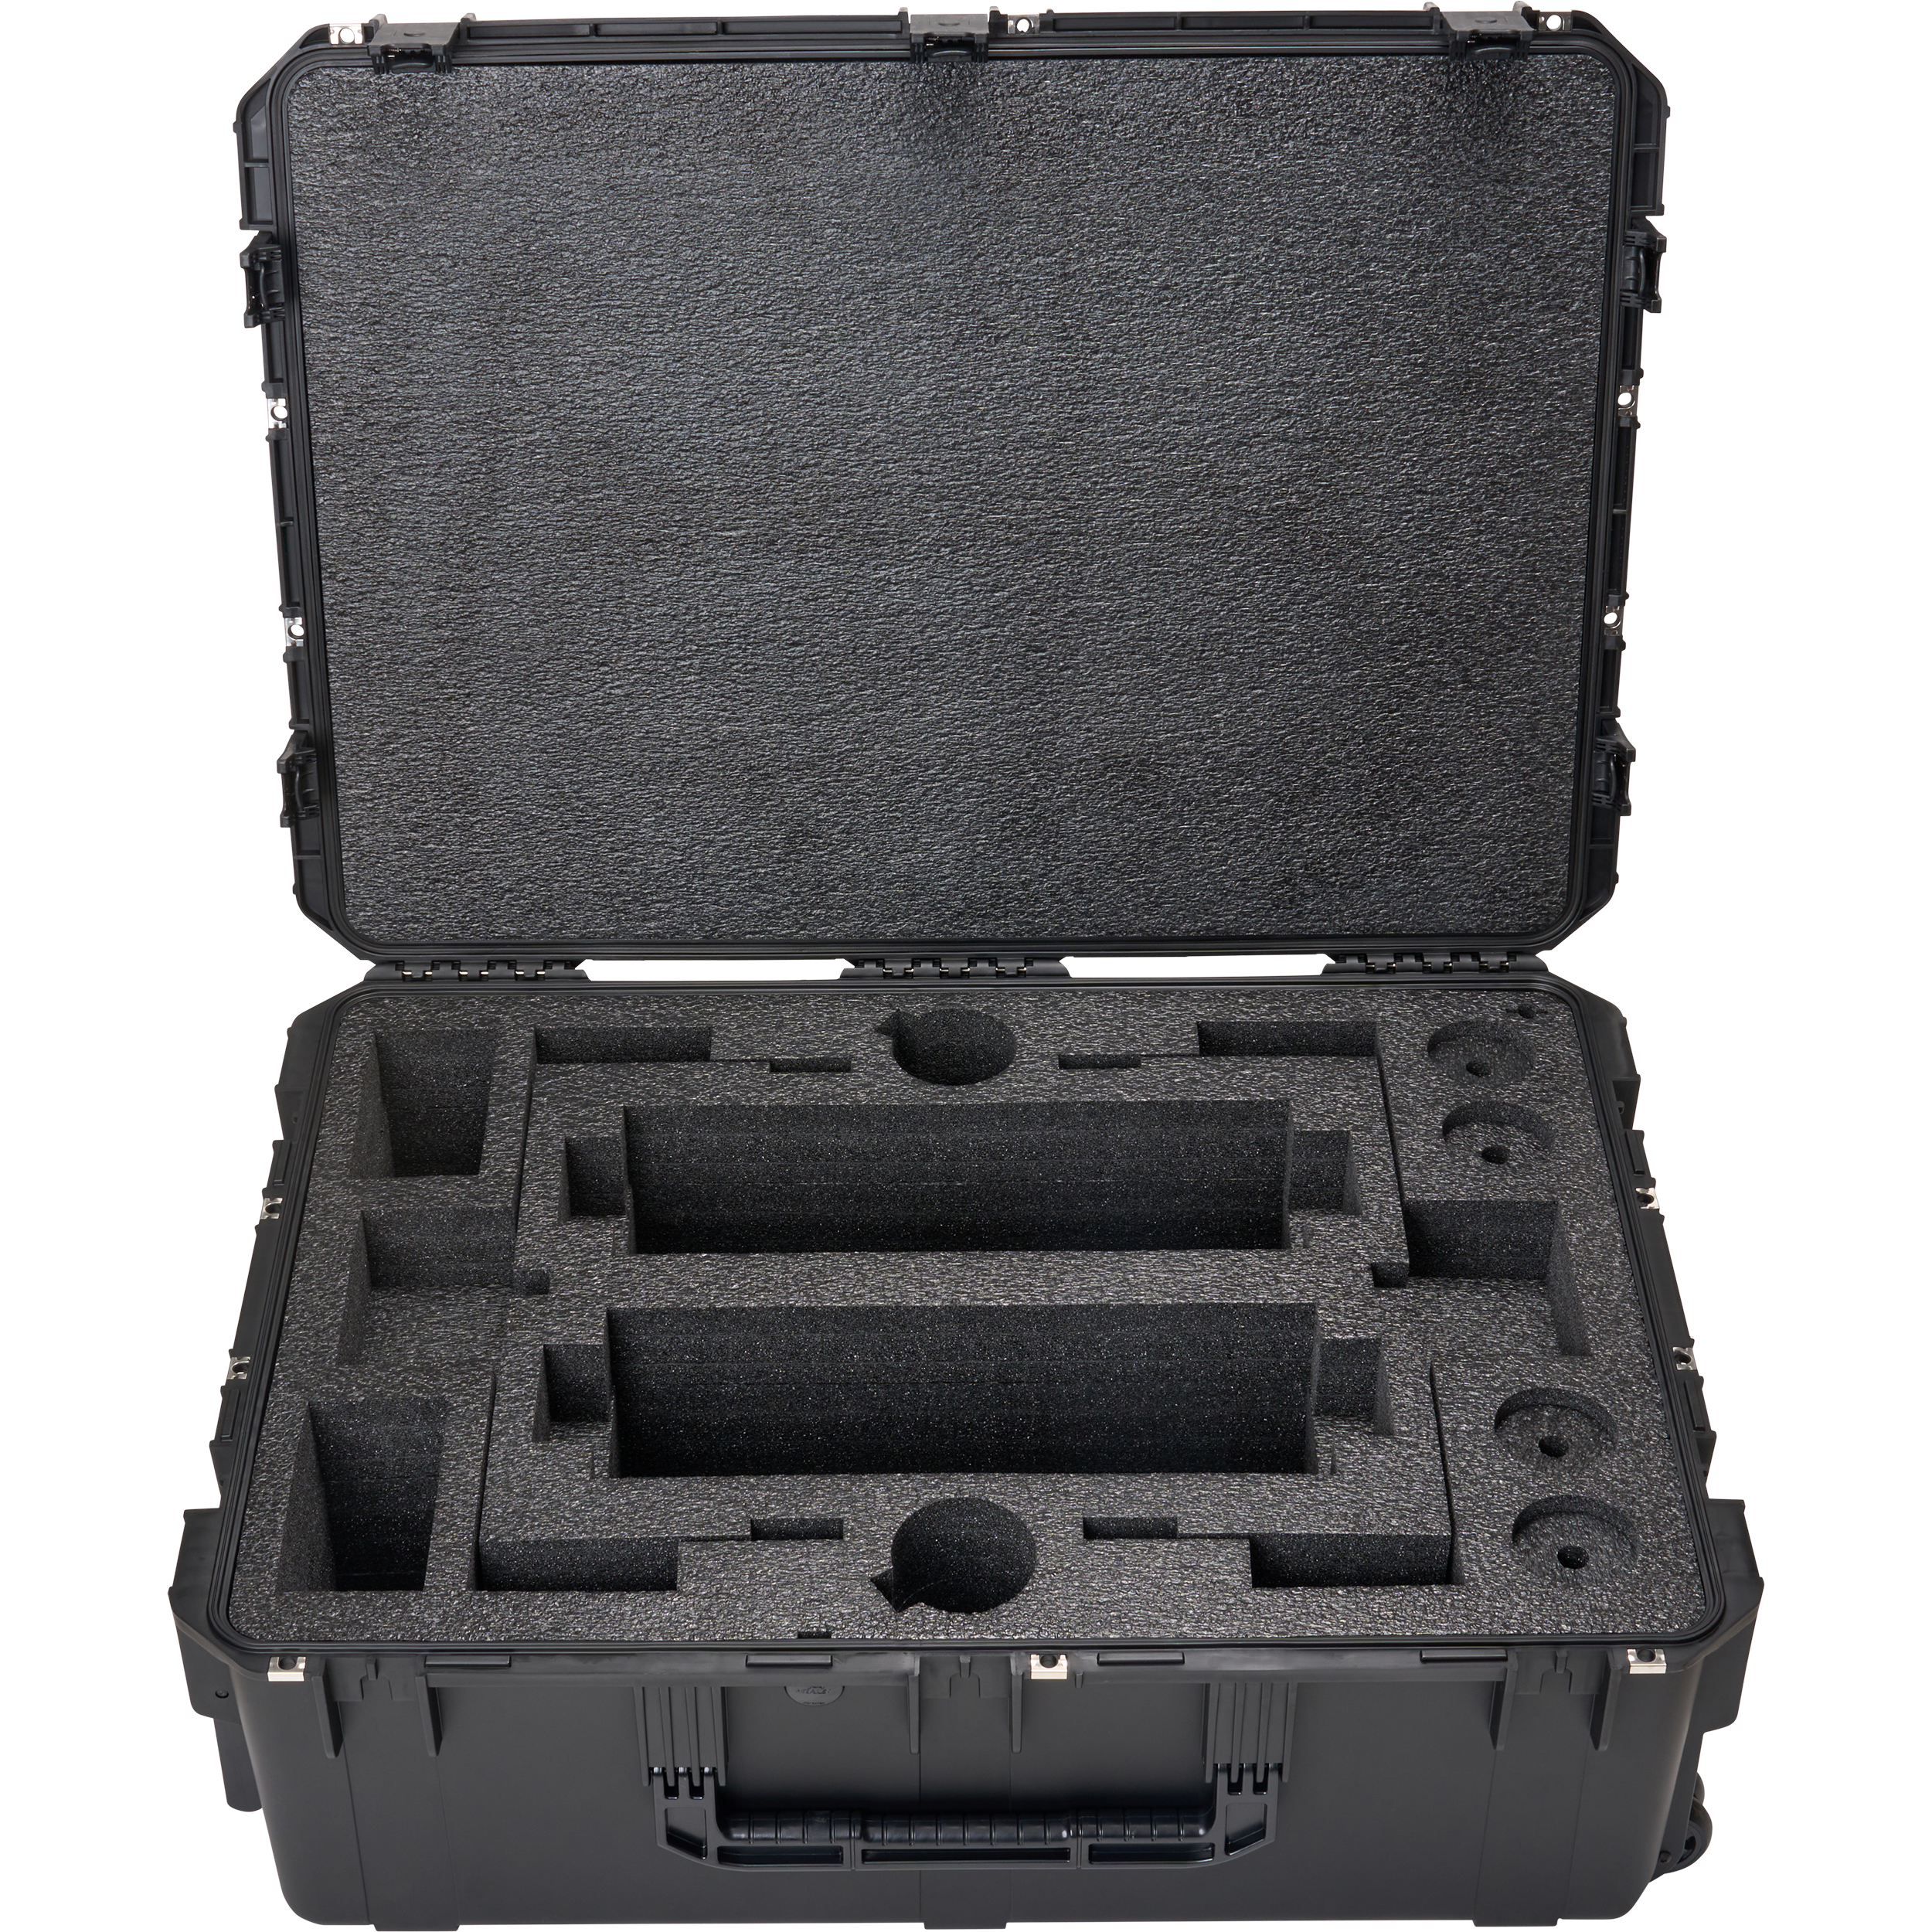 BYFP ipCase for 2x RCF TT515